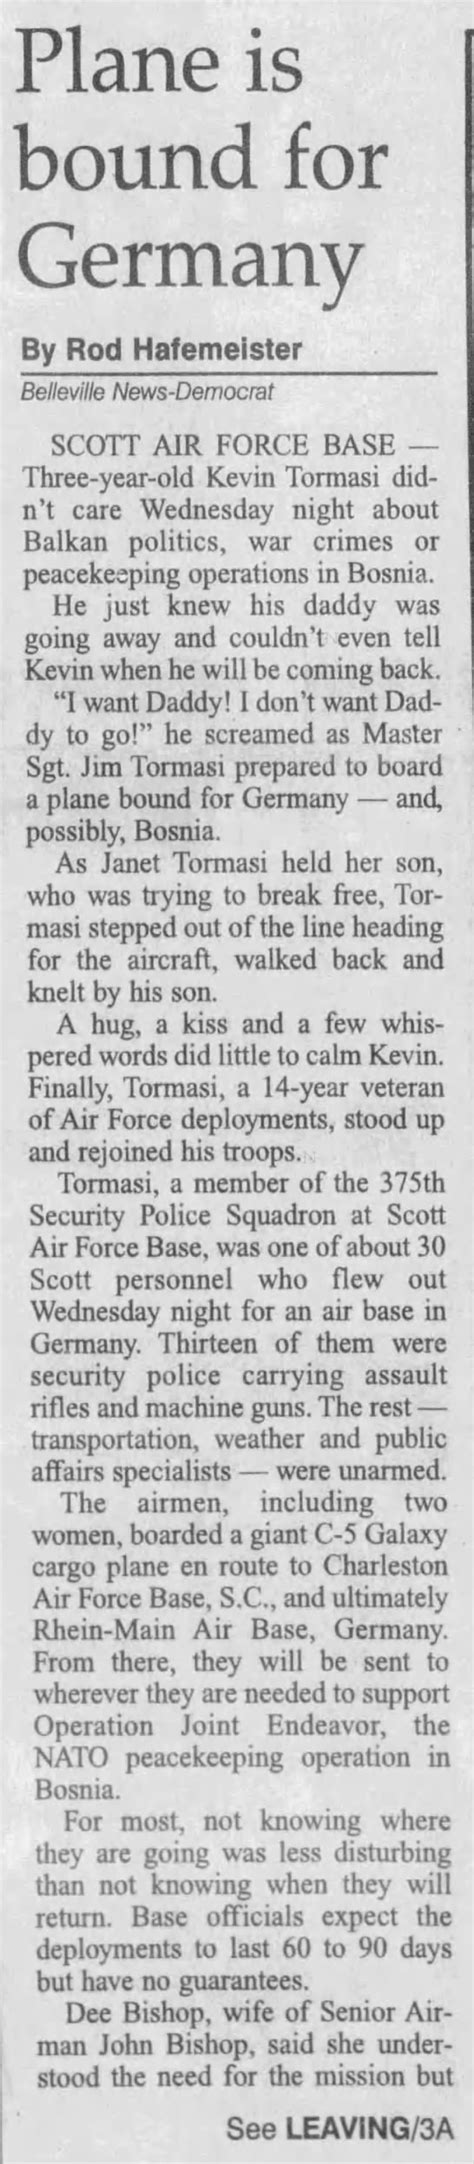 clipping from the belleville news democrat